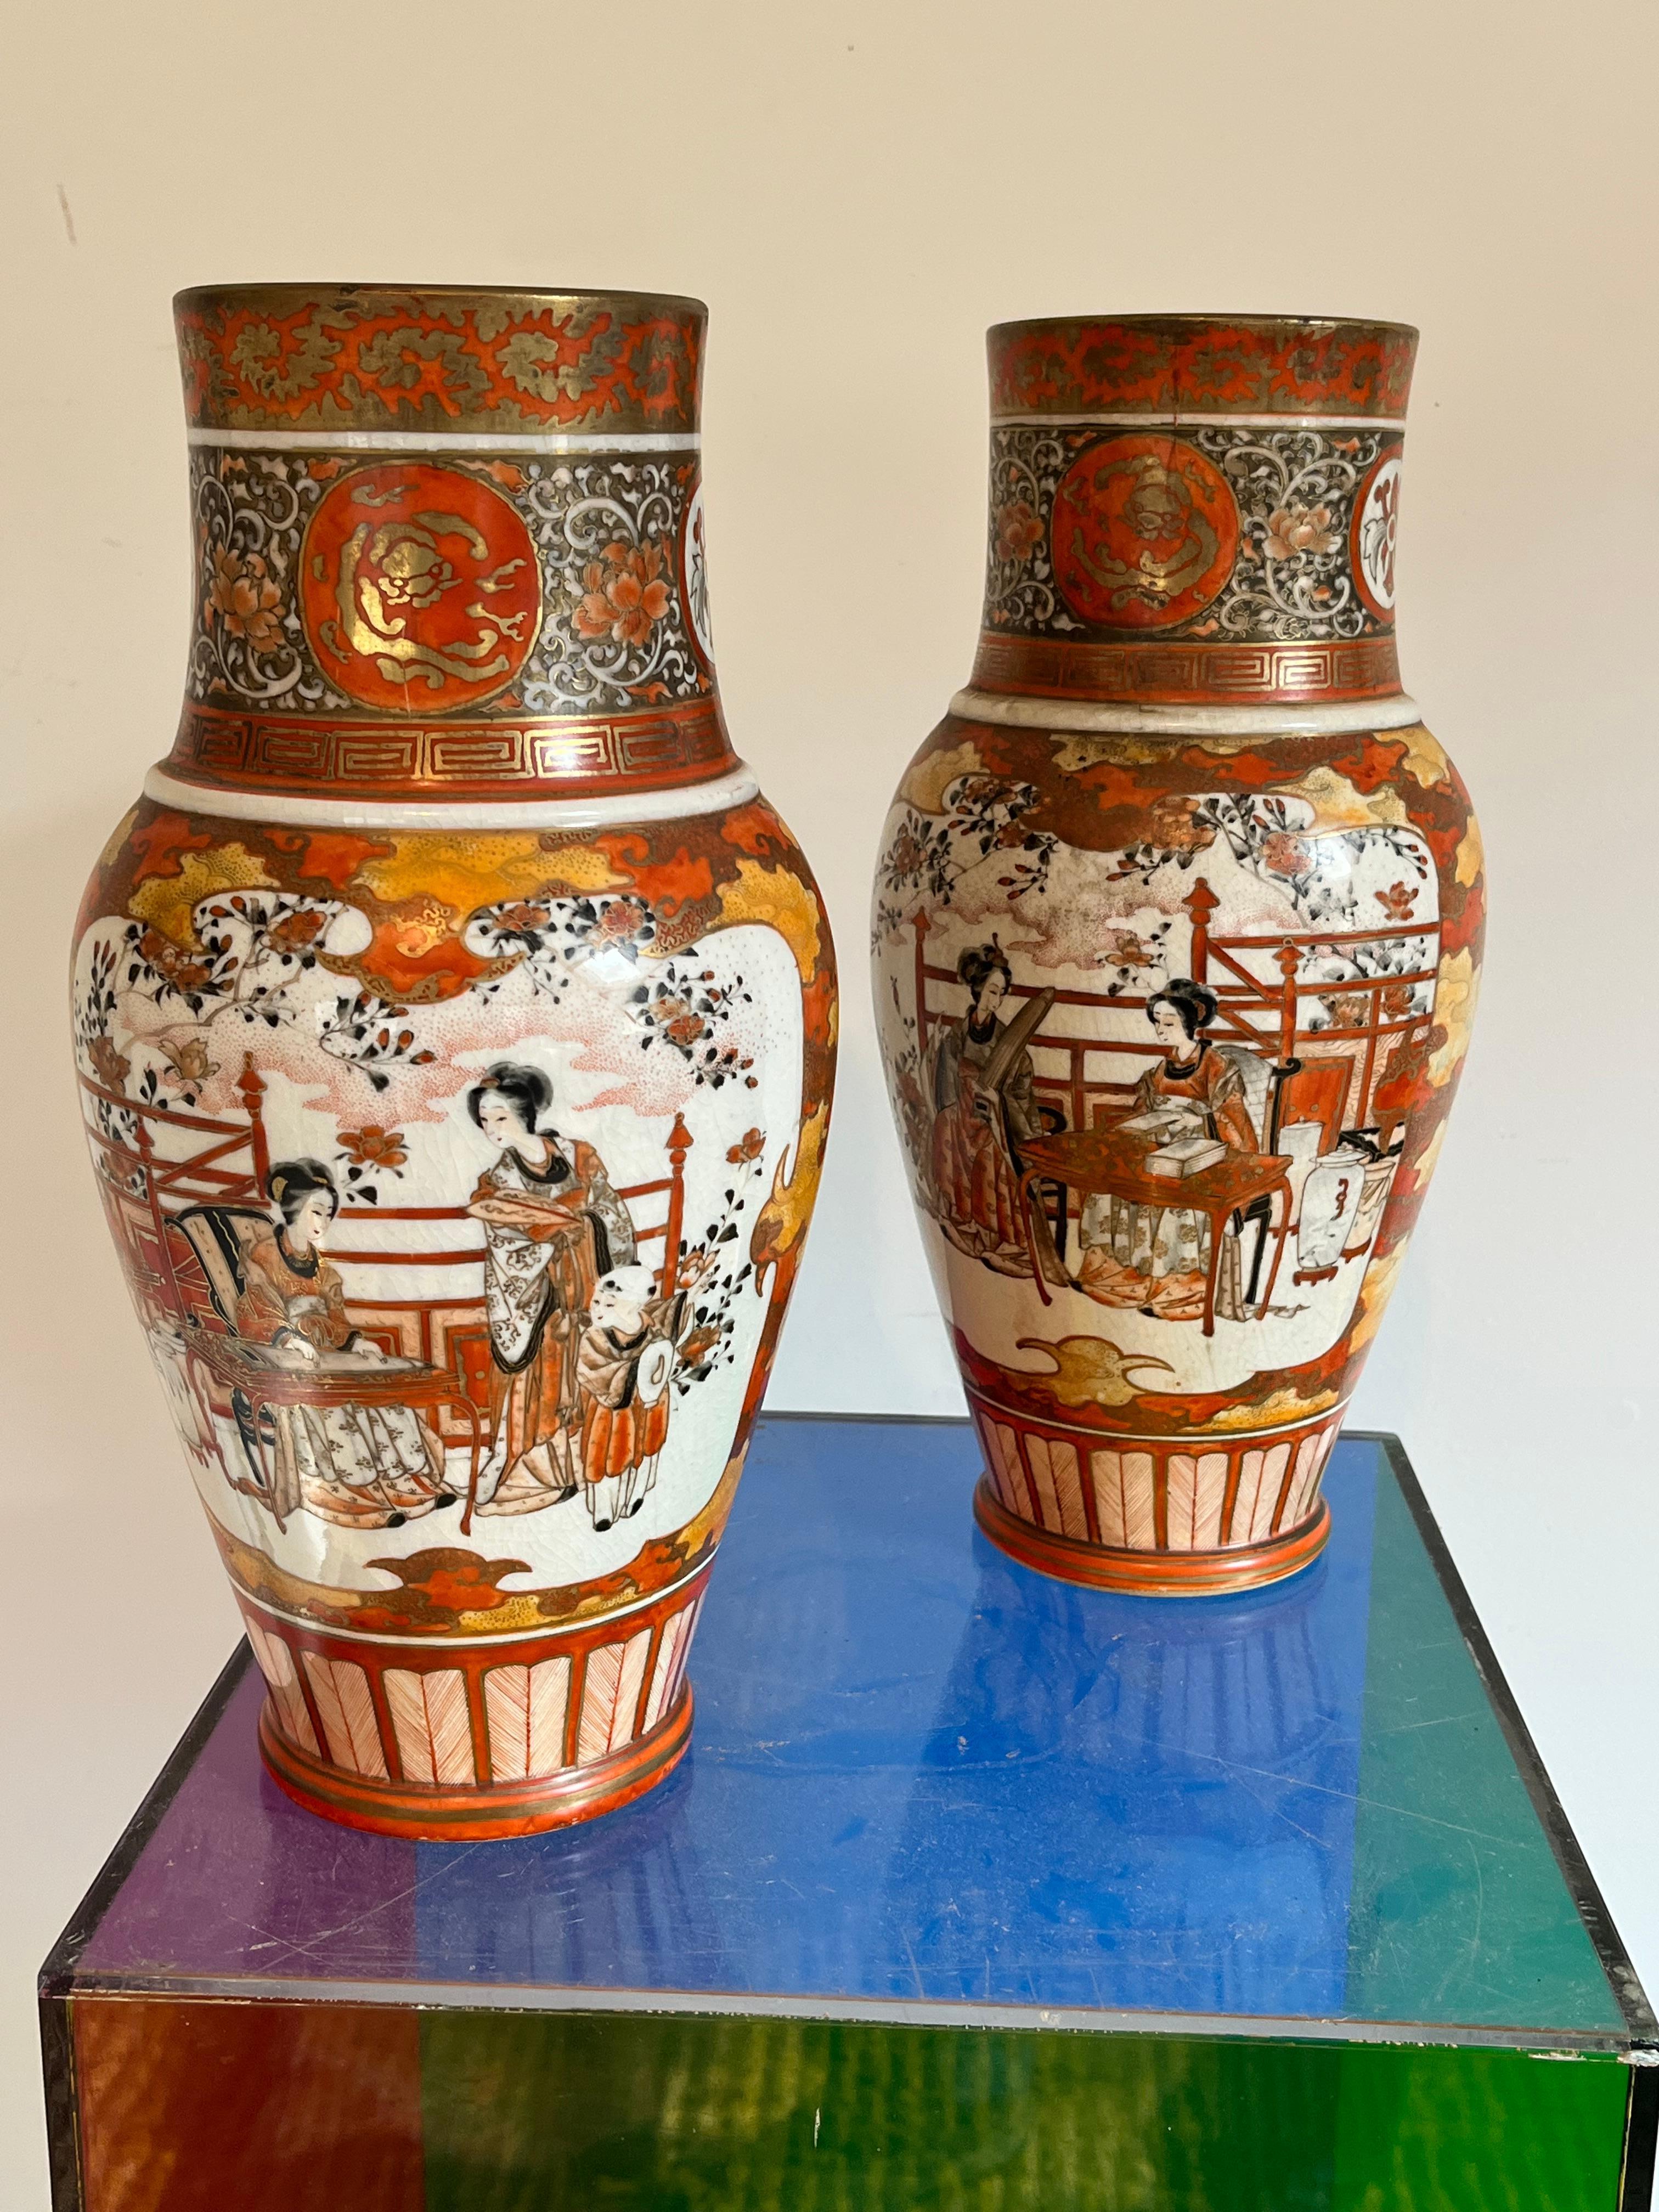 A fine pair of Japanese porcelain vases in the Kutani manner, hand-painted with figural panels depicting women engaged in various occupations, the reverse with floral and bird decoration, red/orange borders with parcel gilt details, the bases each